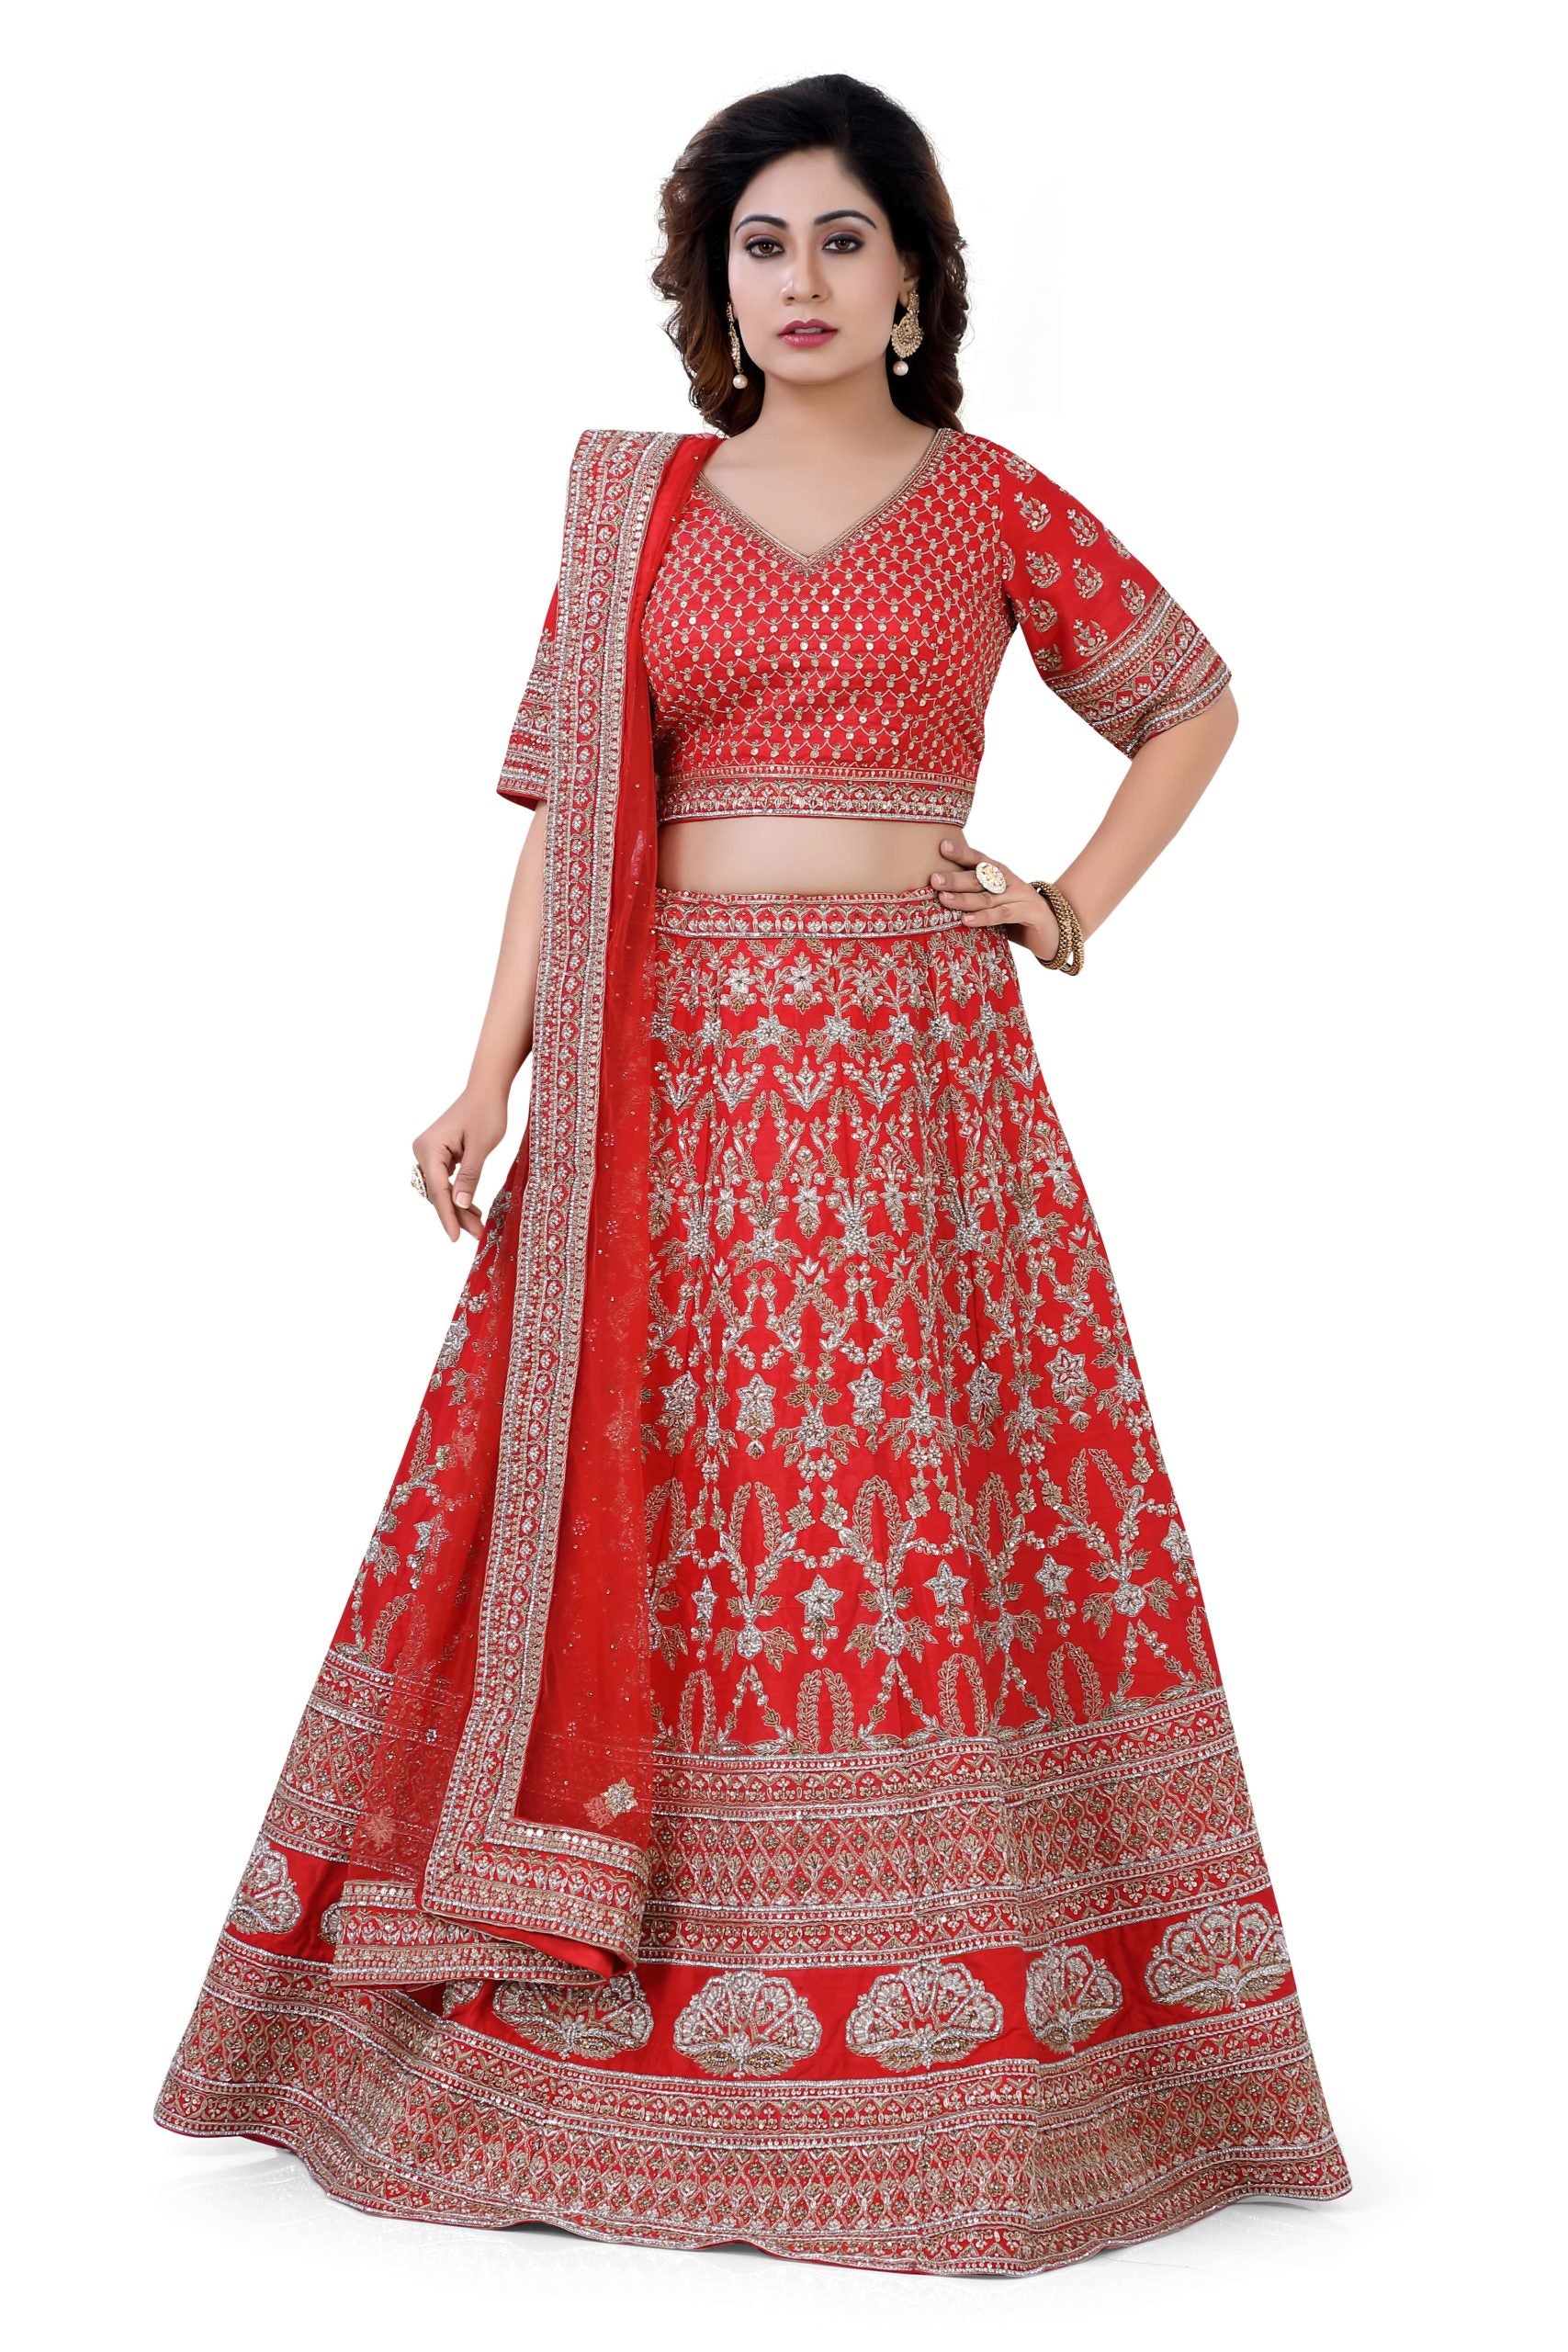 Best Red Colour Heavy Designer Lehenga for wedding | Bridal lehenga red,  Indian bride outfits, Indian bridal wear